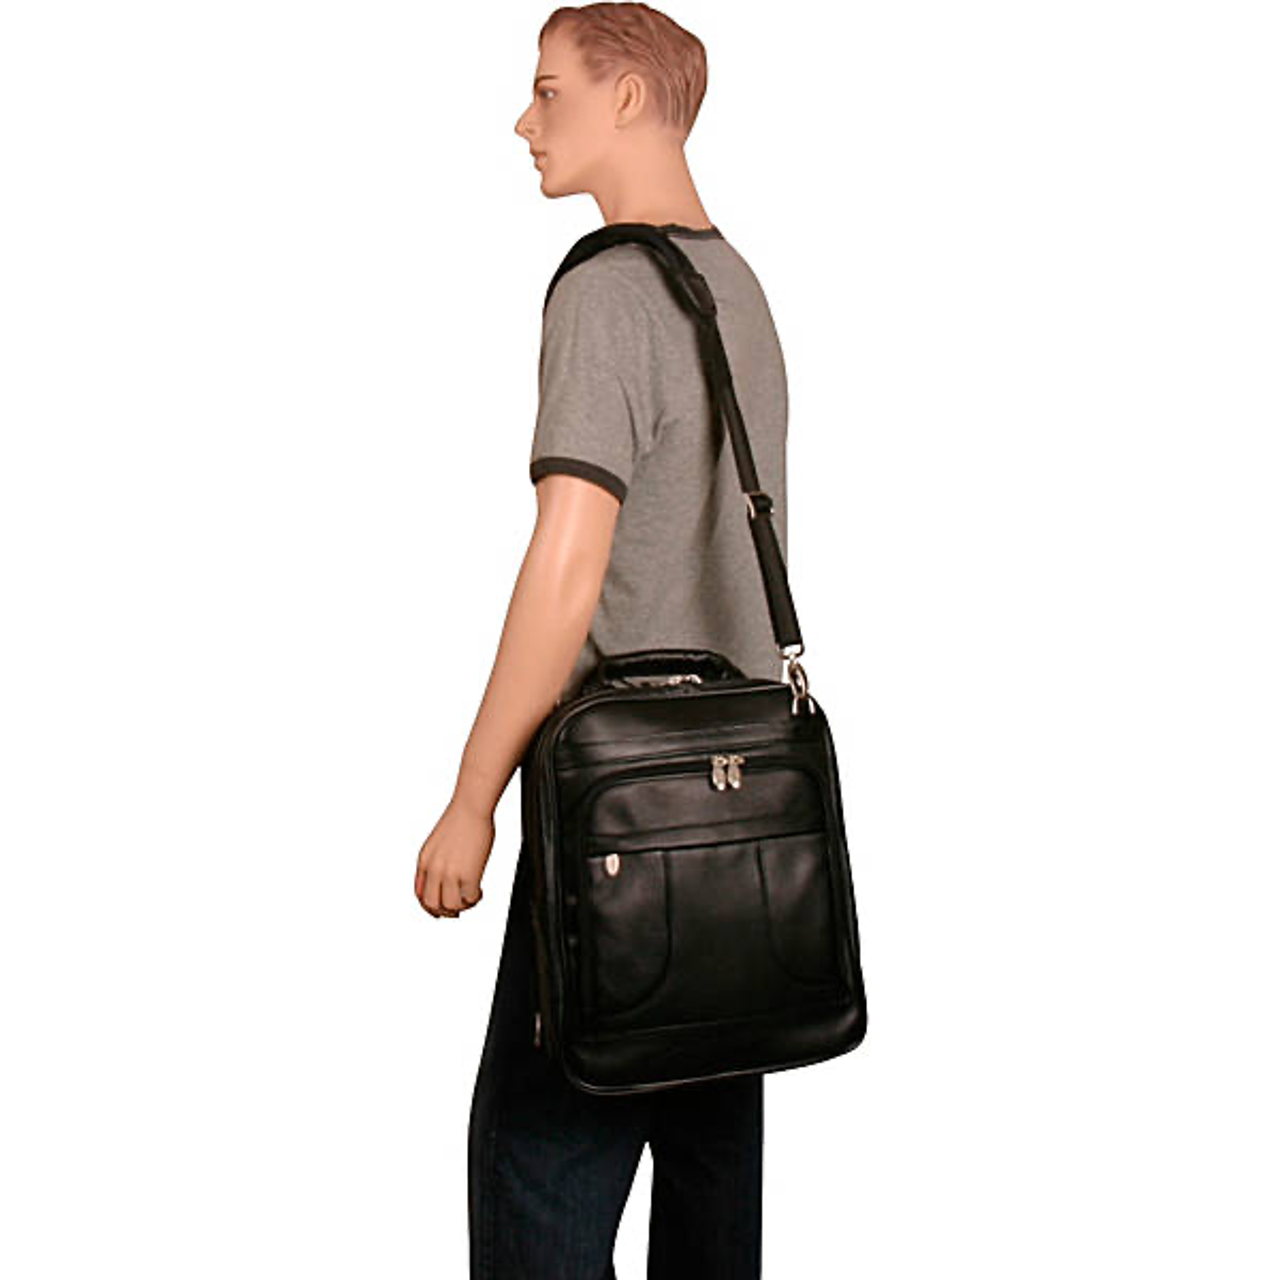 Lincoln Park Leather 15" Three-Way Laptop Backpack - Leather Loom